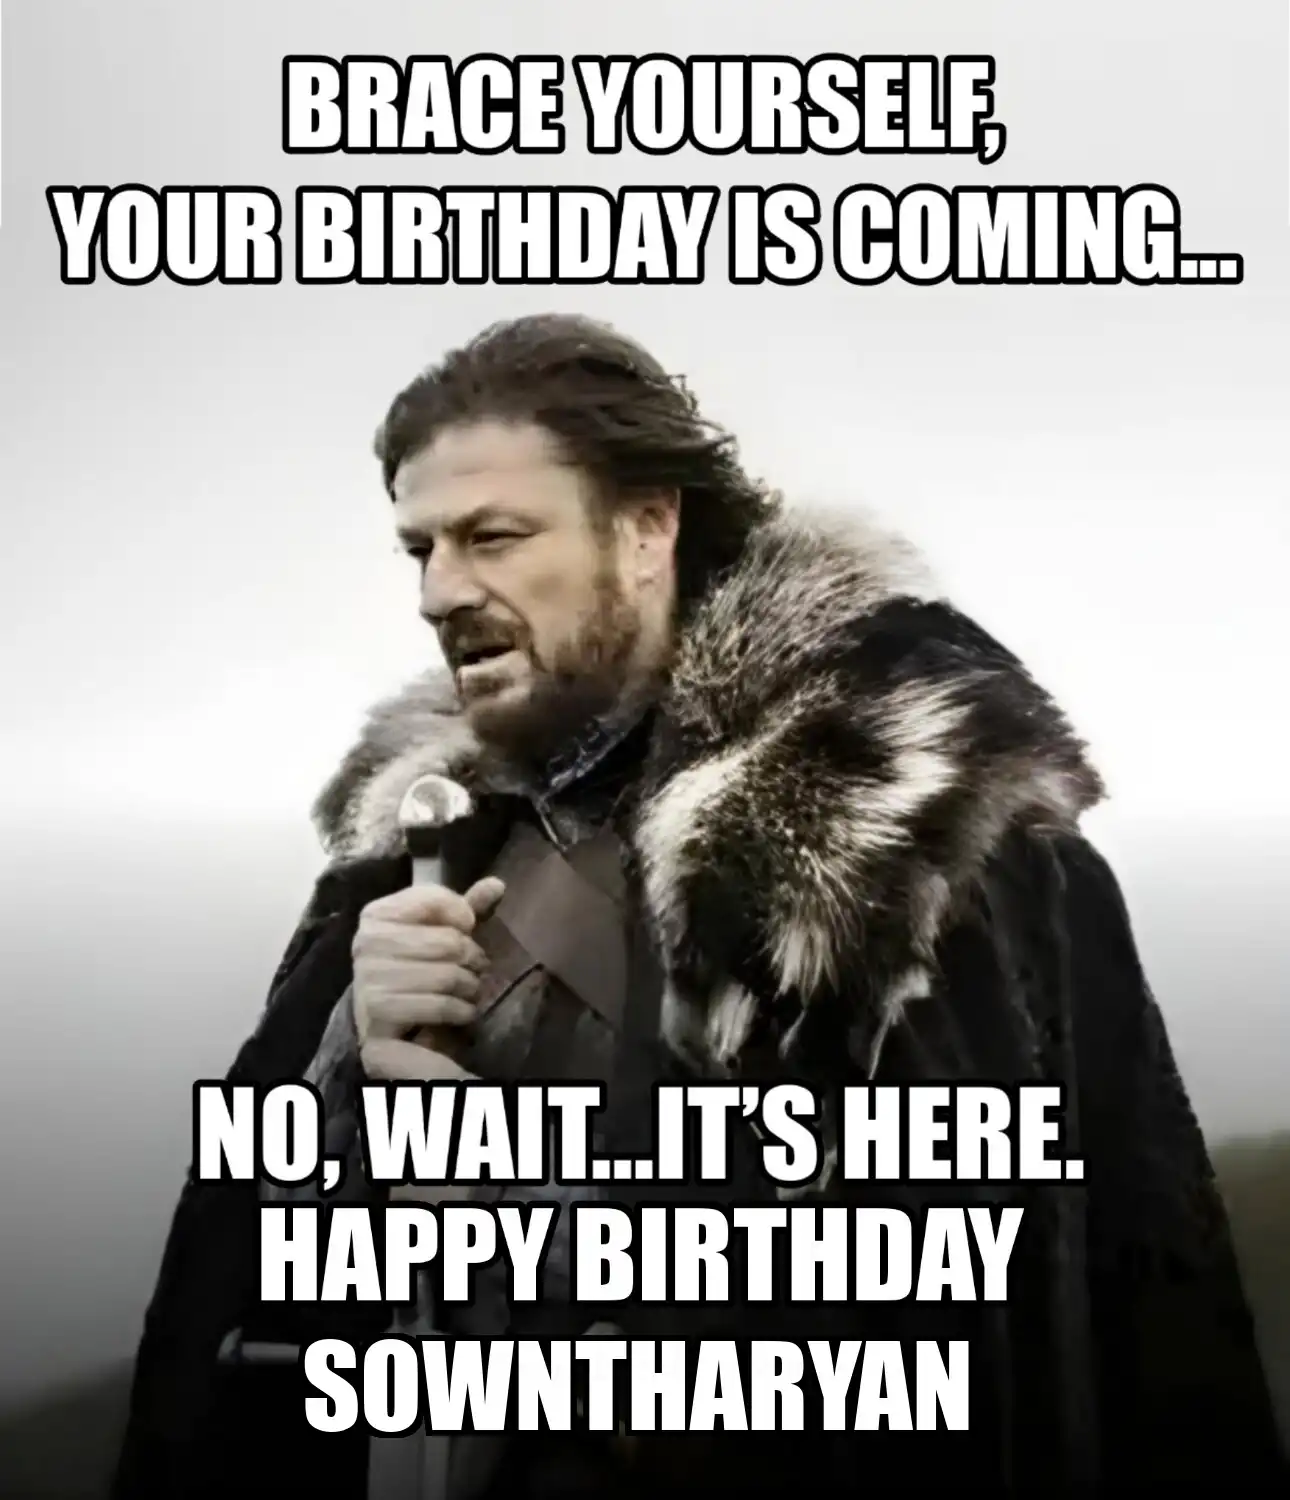 Happy Birthday Sowntharyan Brace Yourself Your Birthday Is Coming Meme